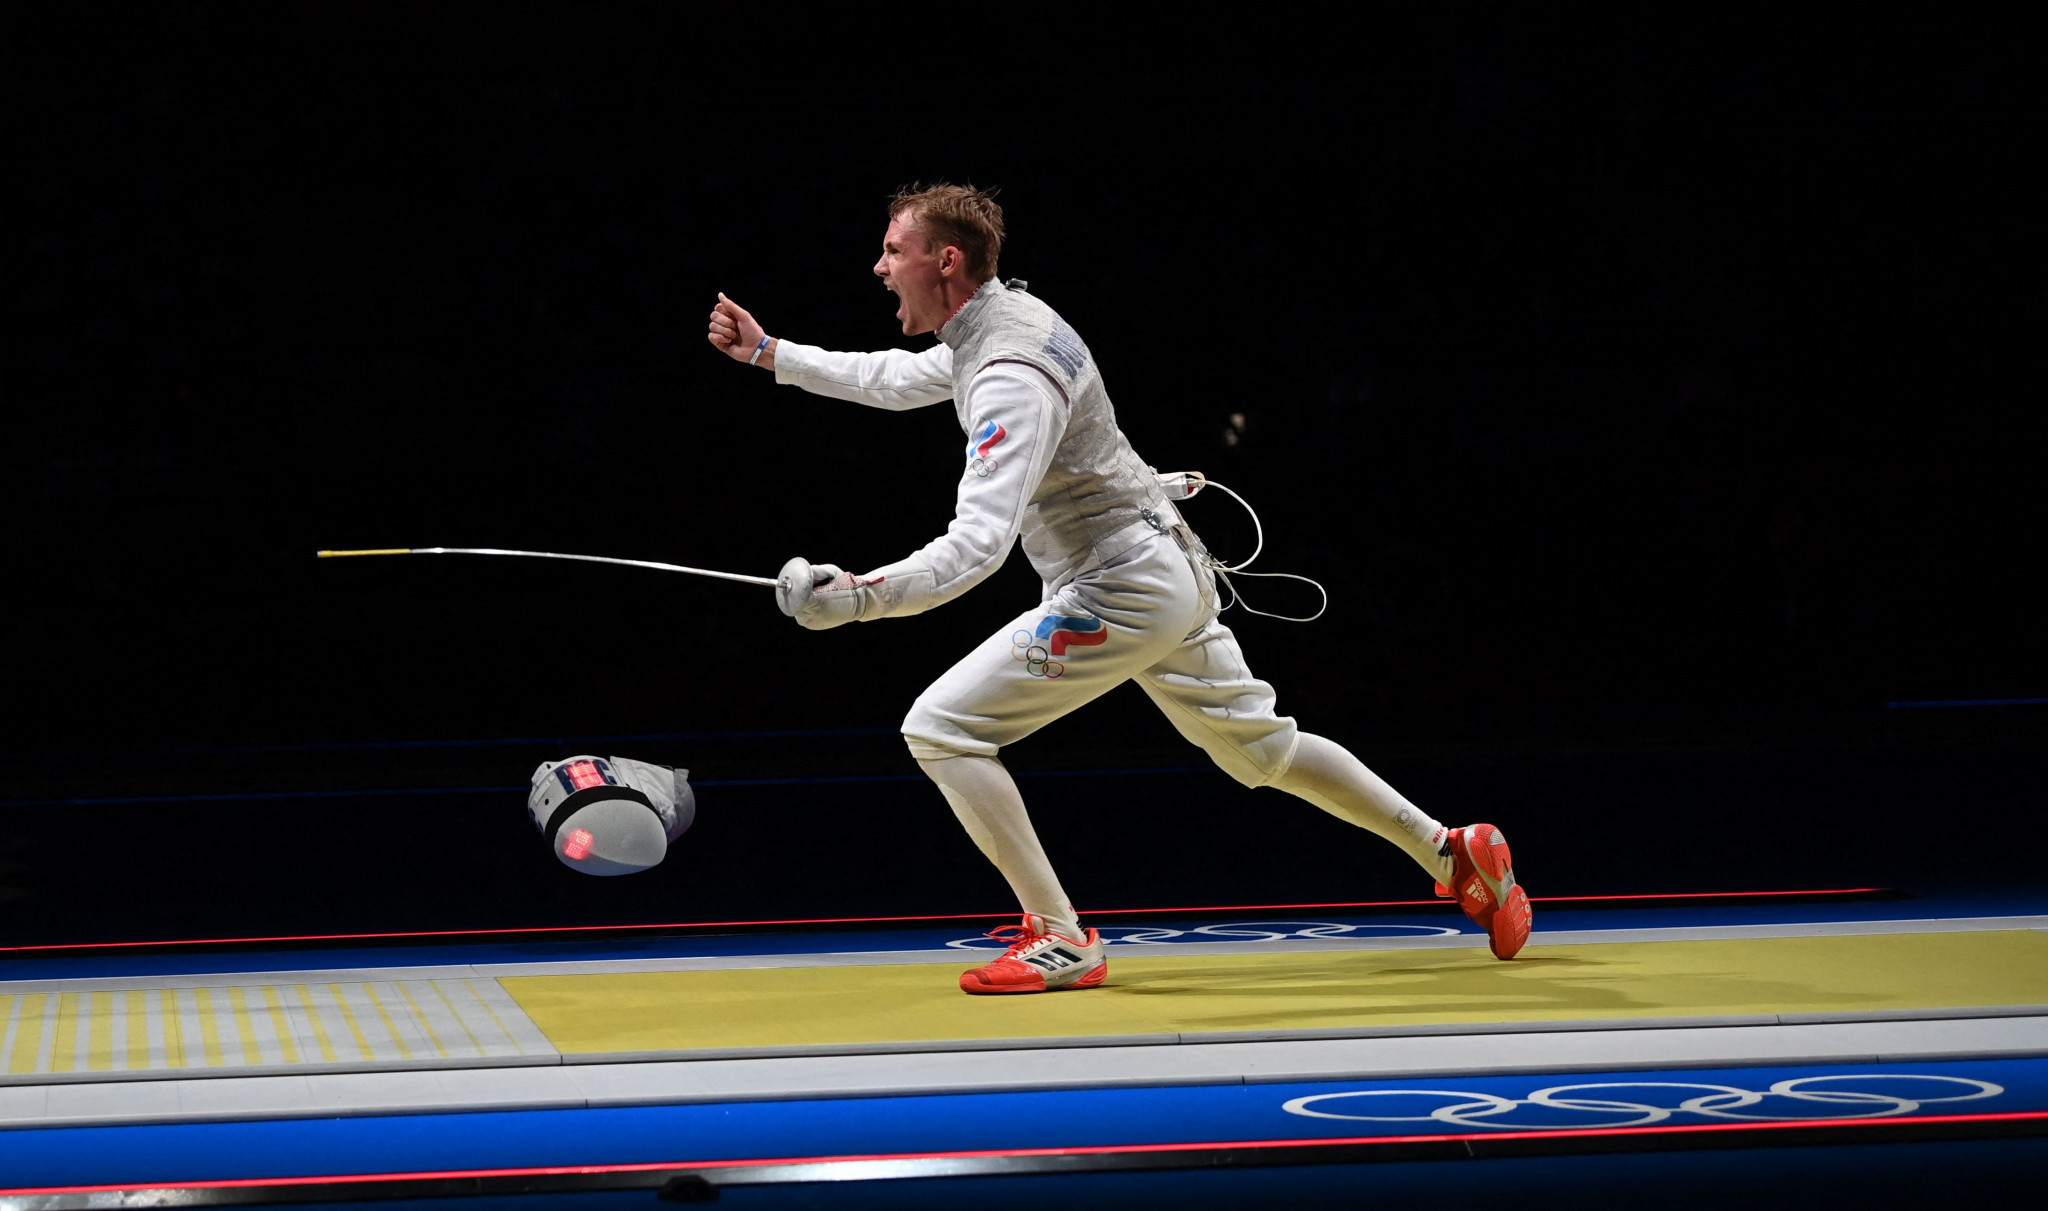 USA Fencing has said it will vote against the reinstatement of fencers and officials from Russia and Belarus during an FIE Extraordinary Congress ©Getty Images